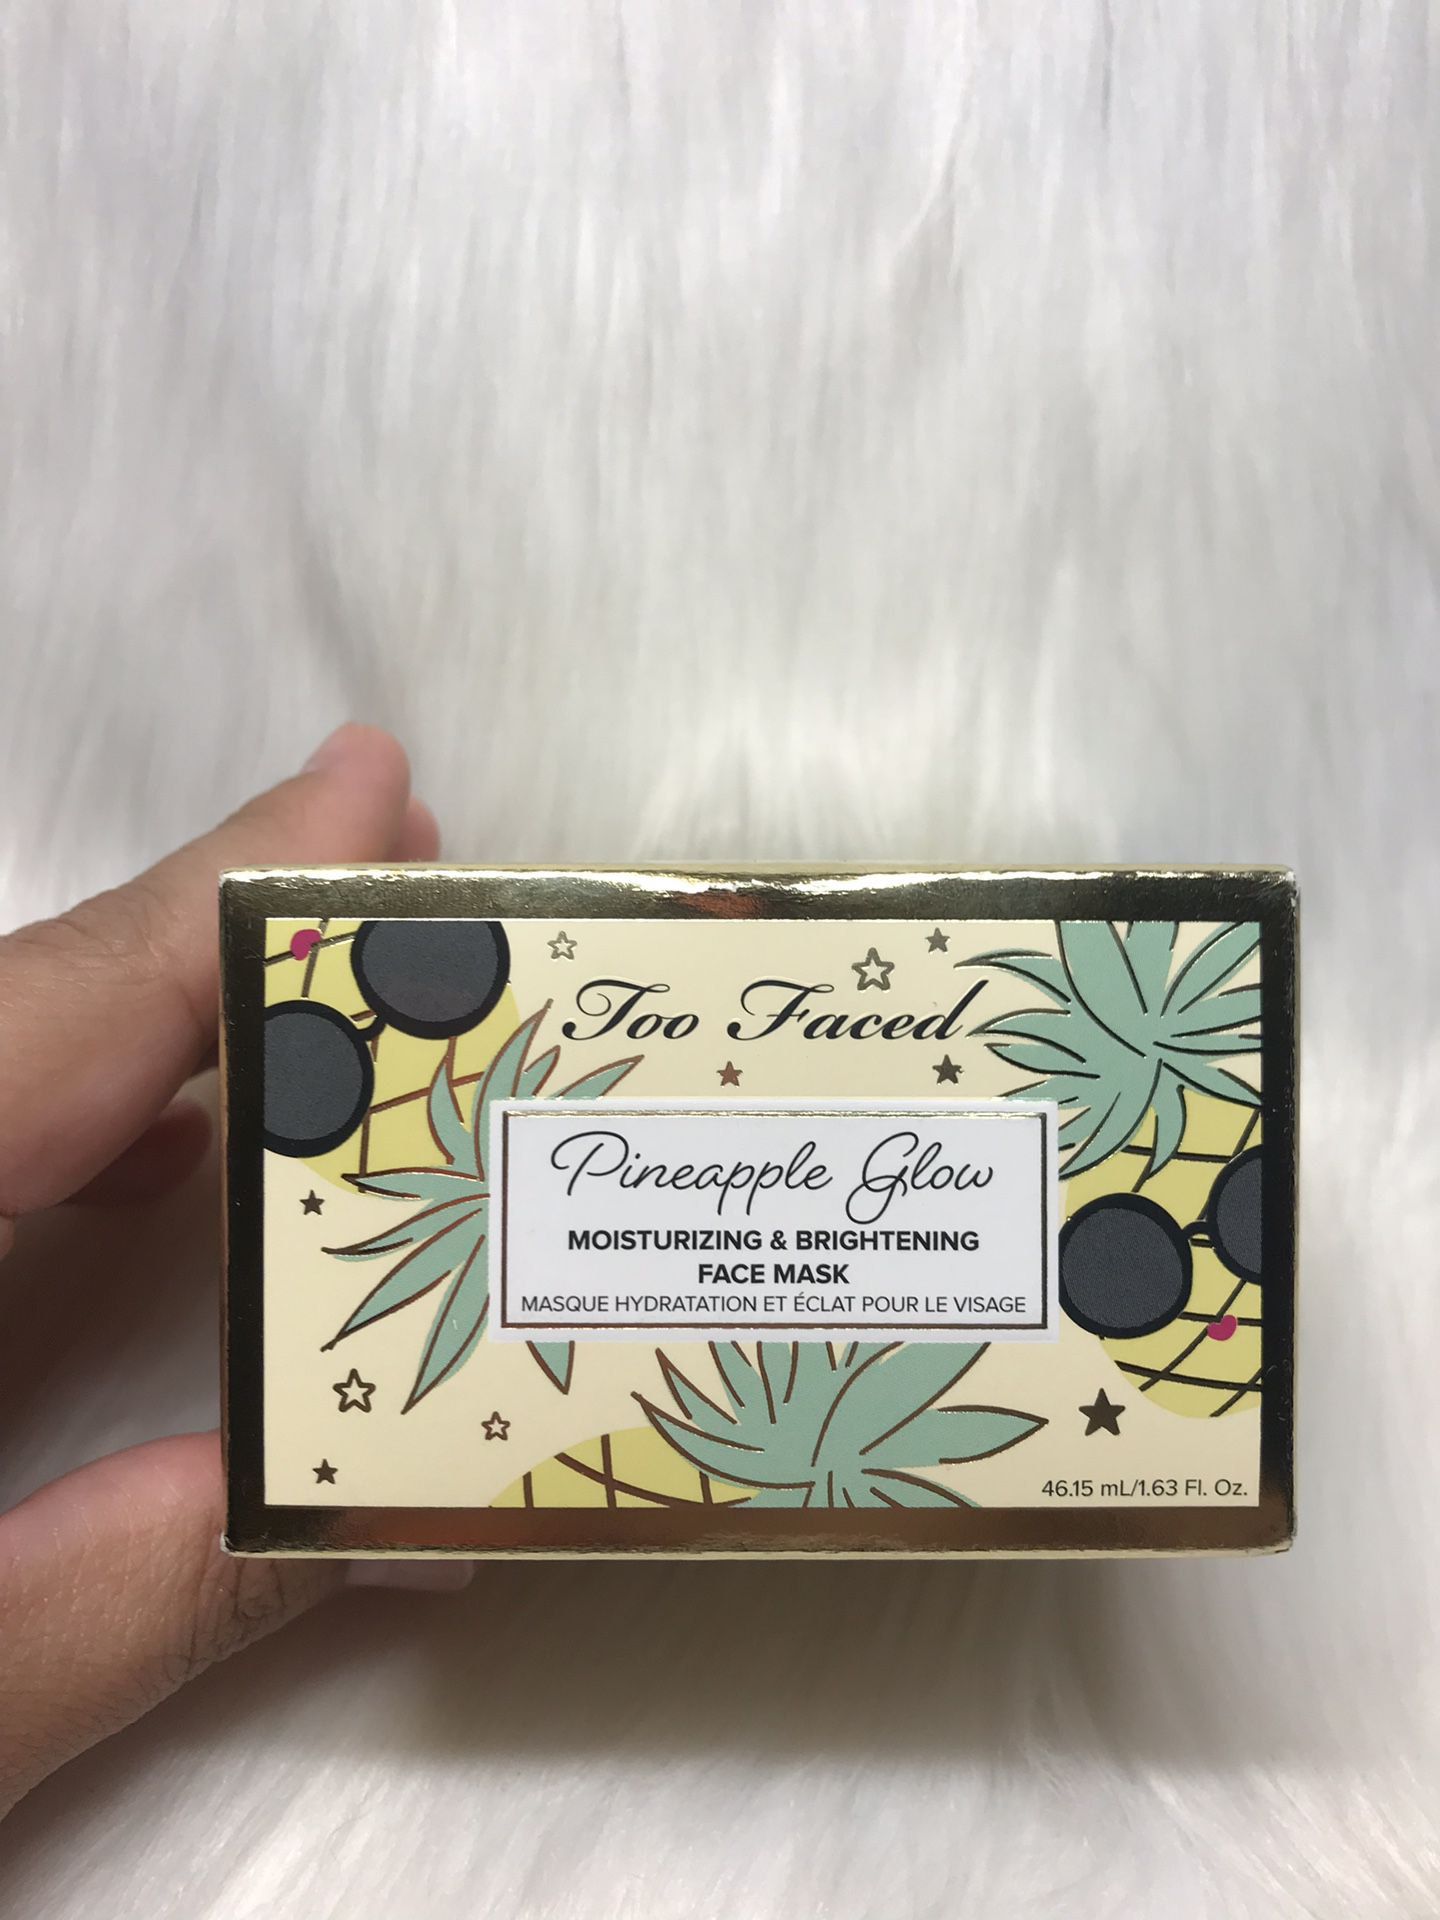 New Limited Edition too faced pineapple glow mask